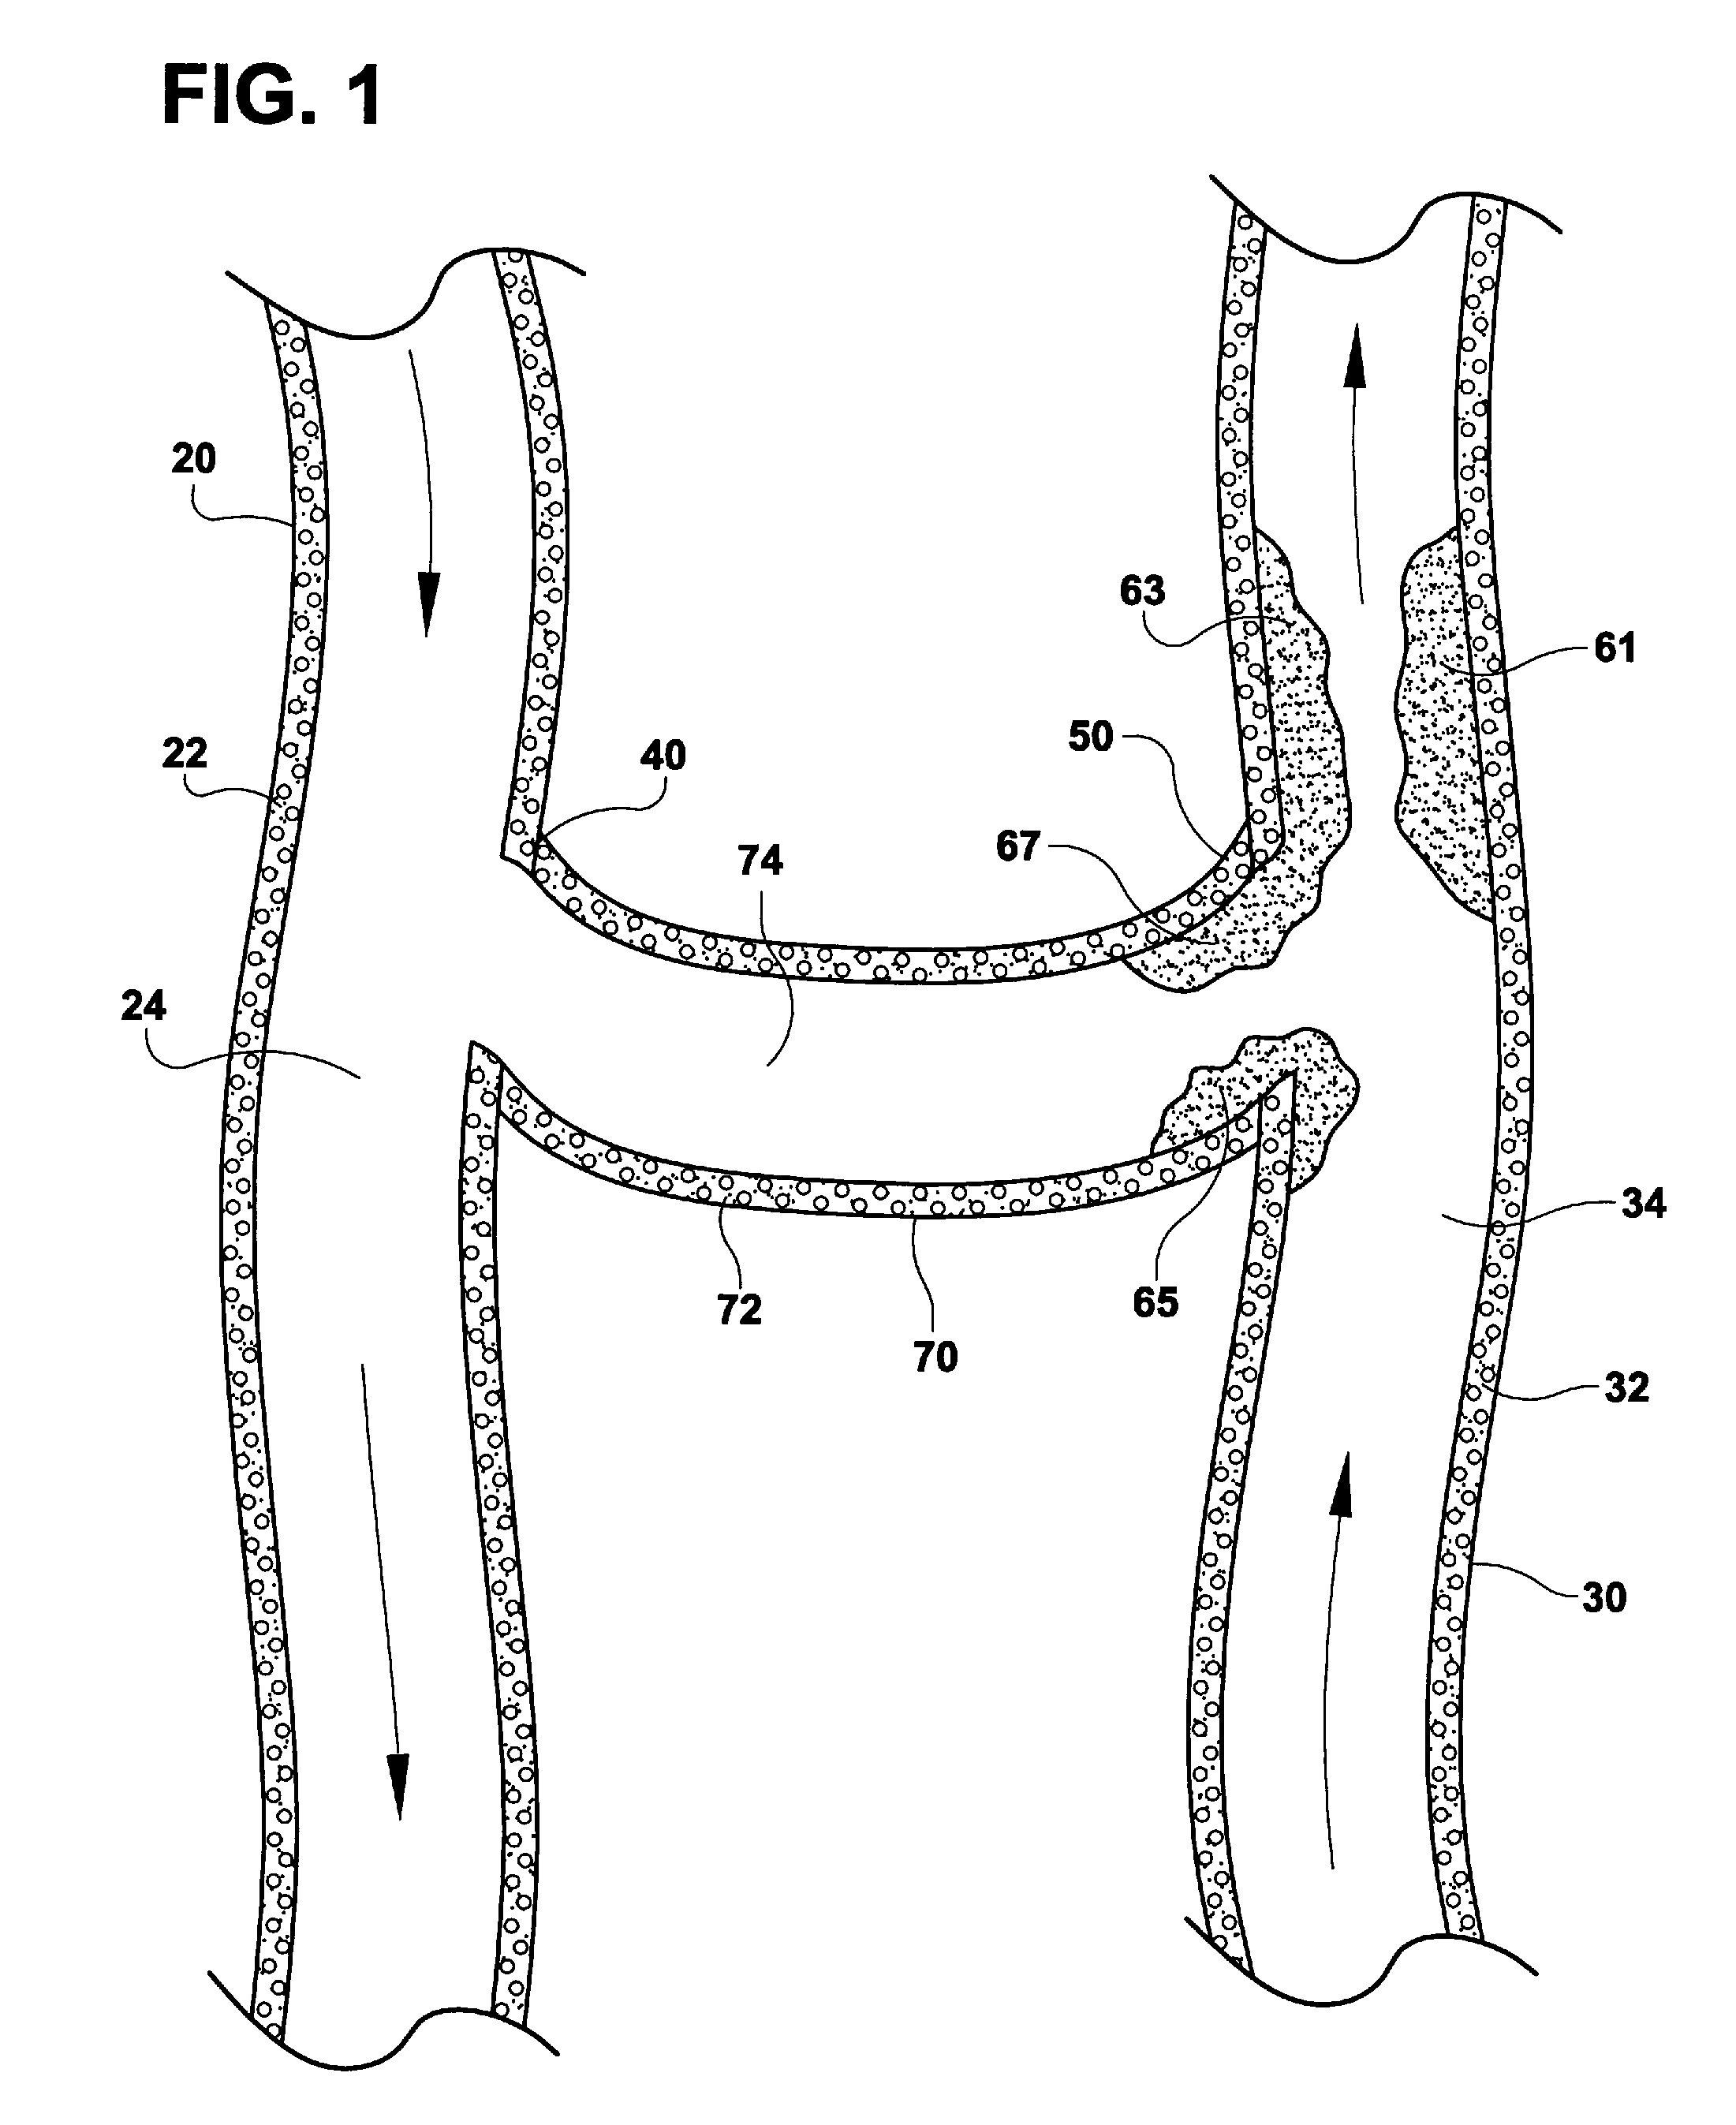 Method for Treatment of Complications Associated with Arteriovenous Grafts and Fistulas Using Electroporation